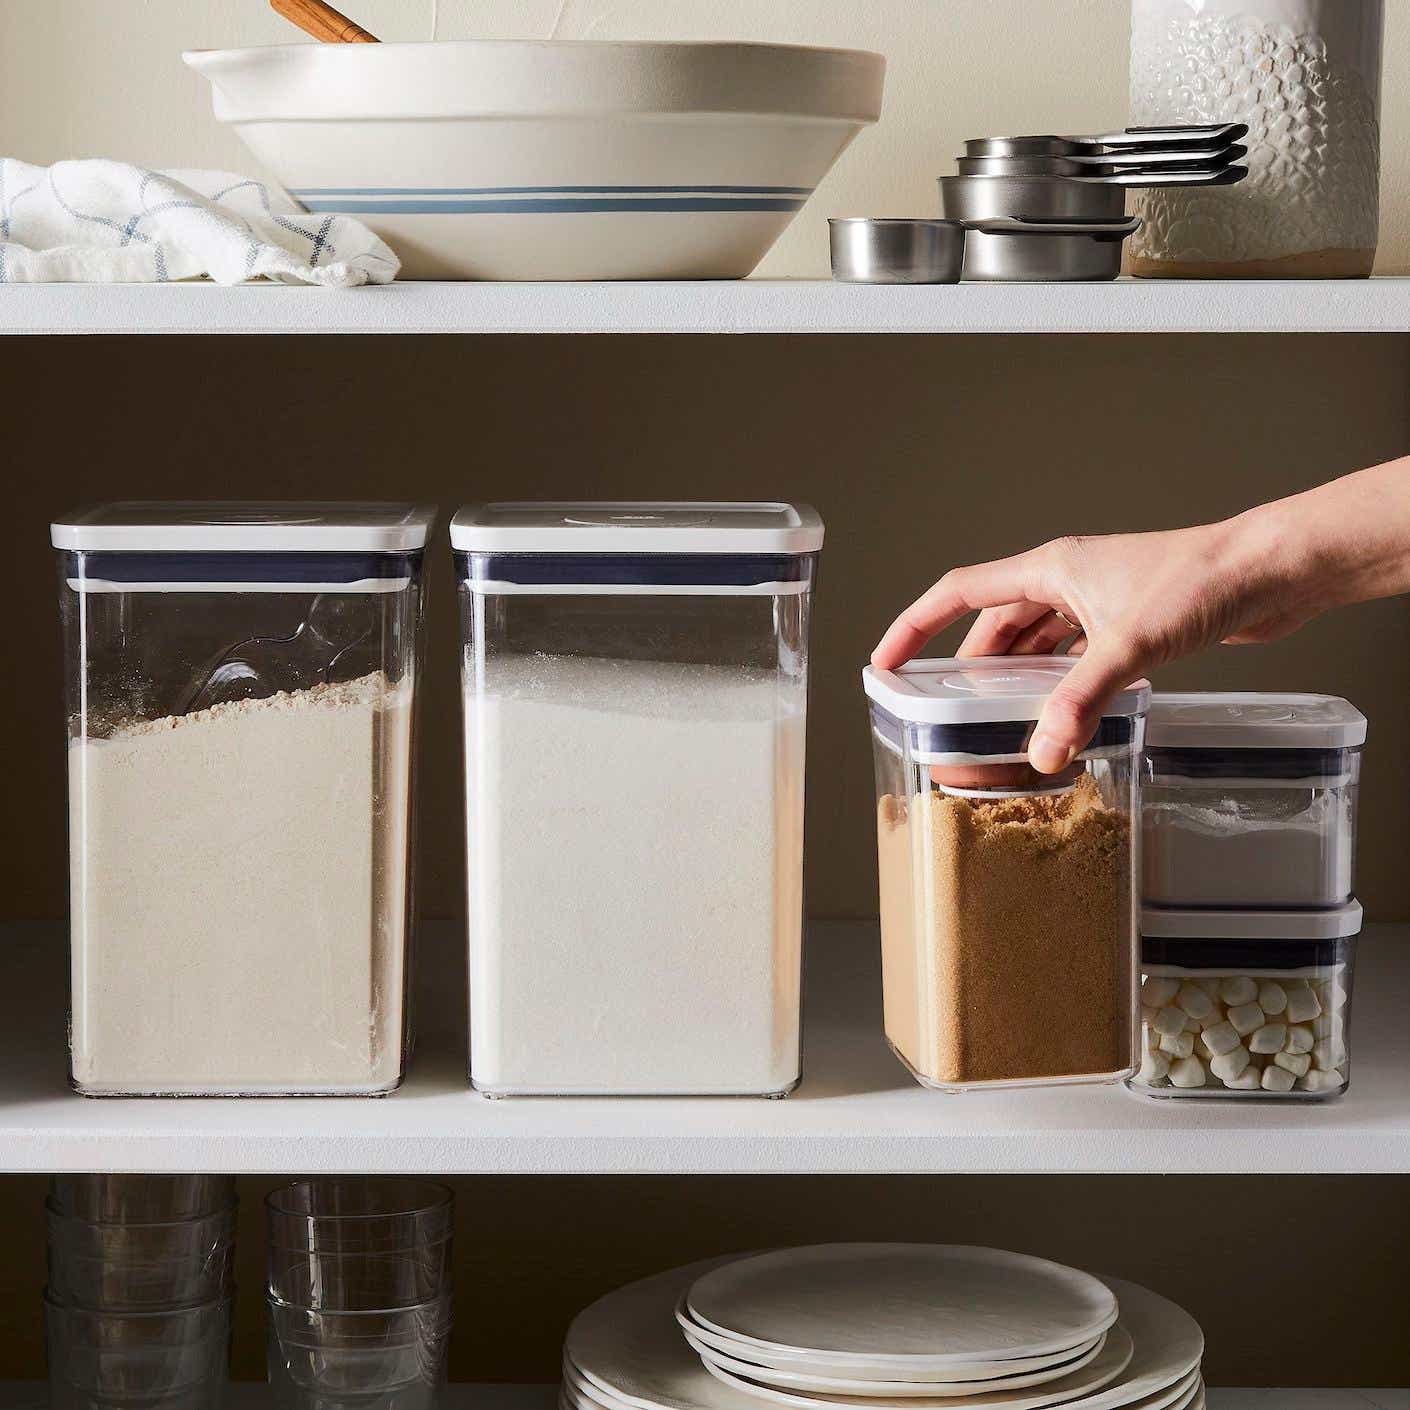 A hand pulls a clear food storage container off of a full pantry shelf.